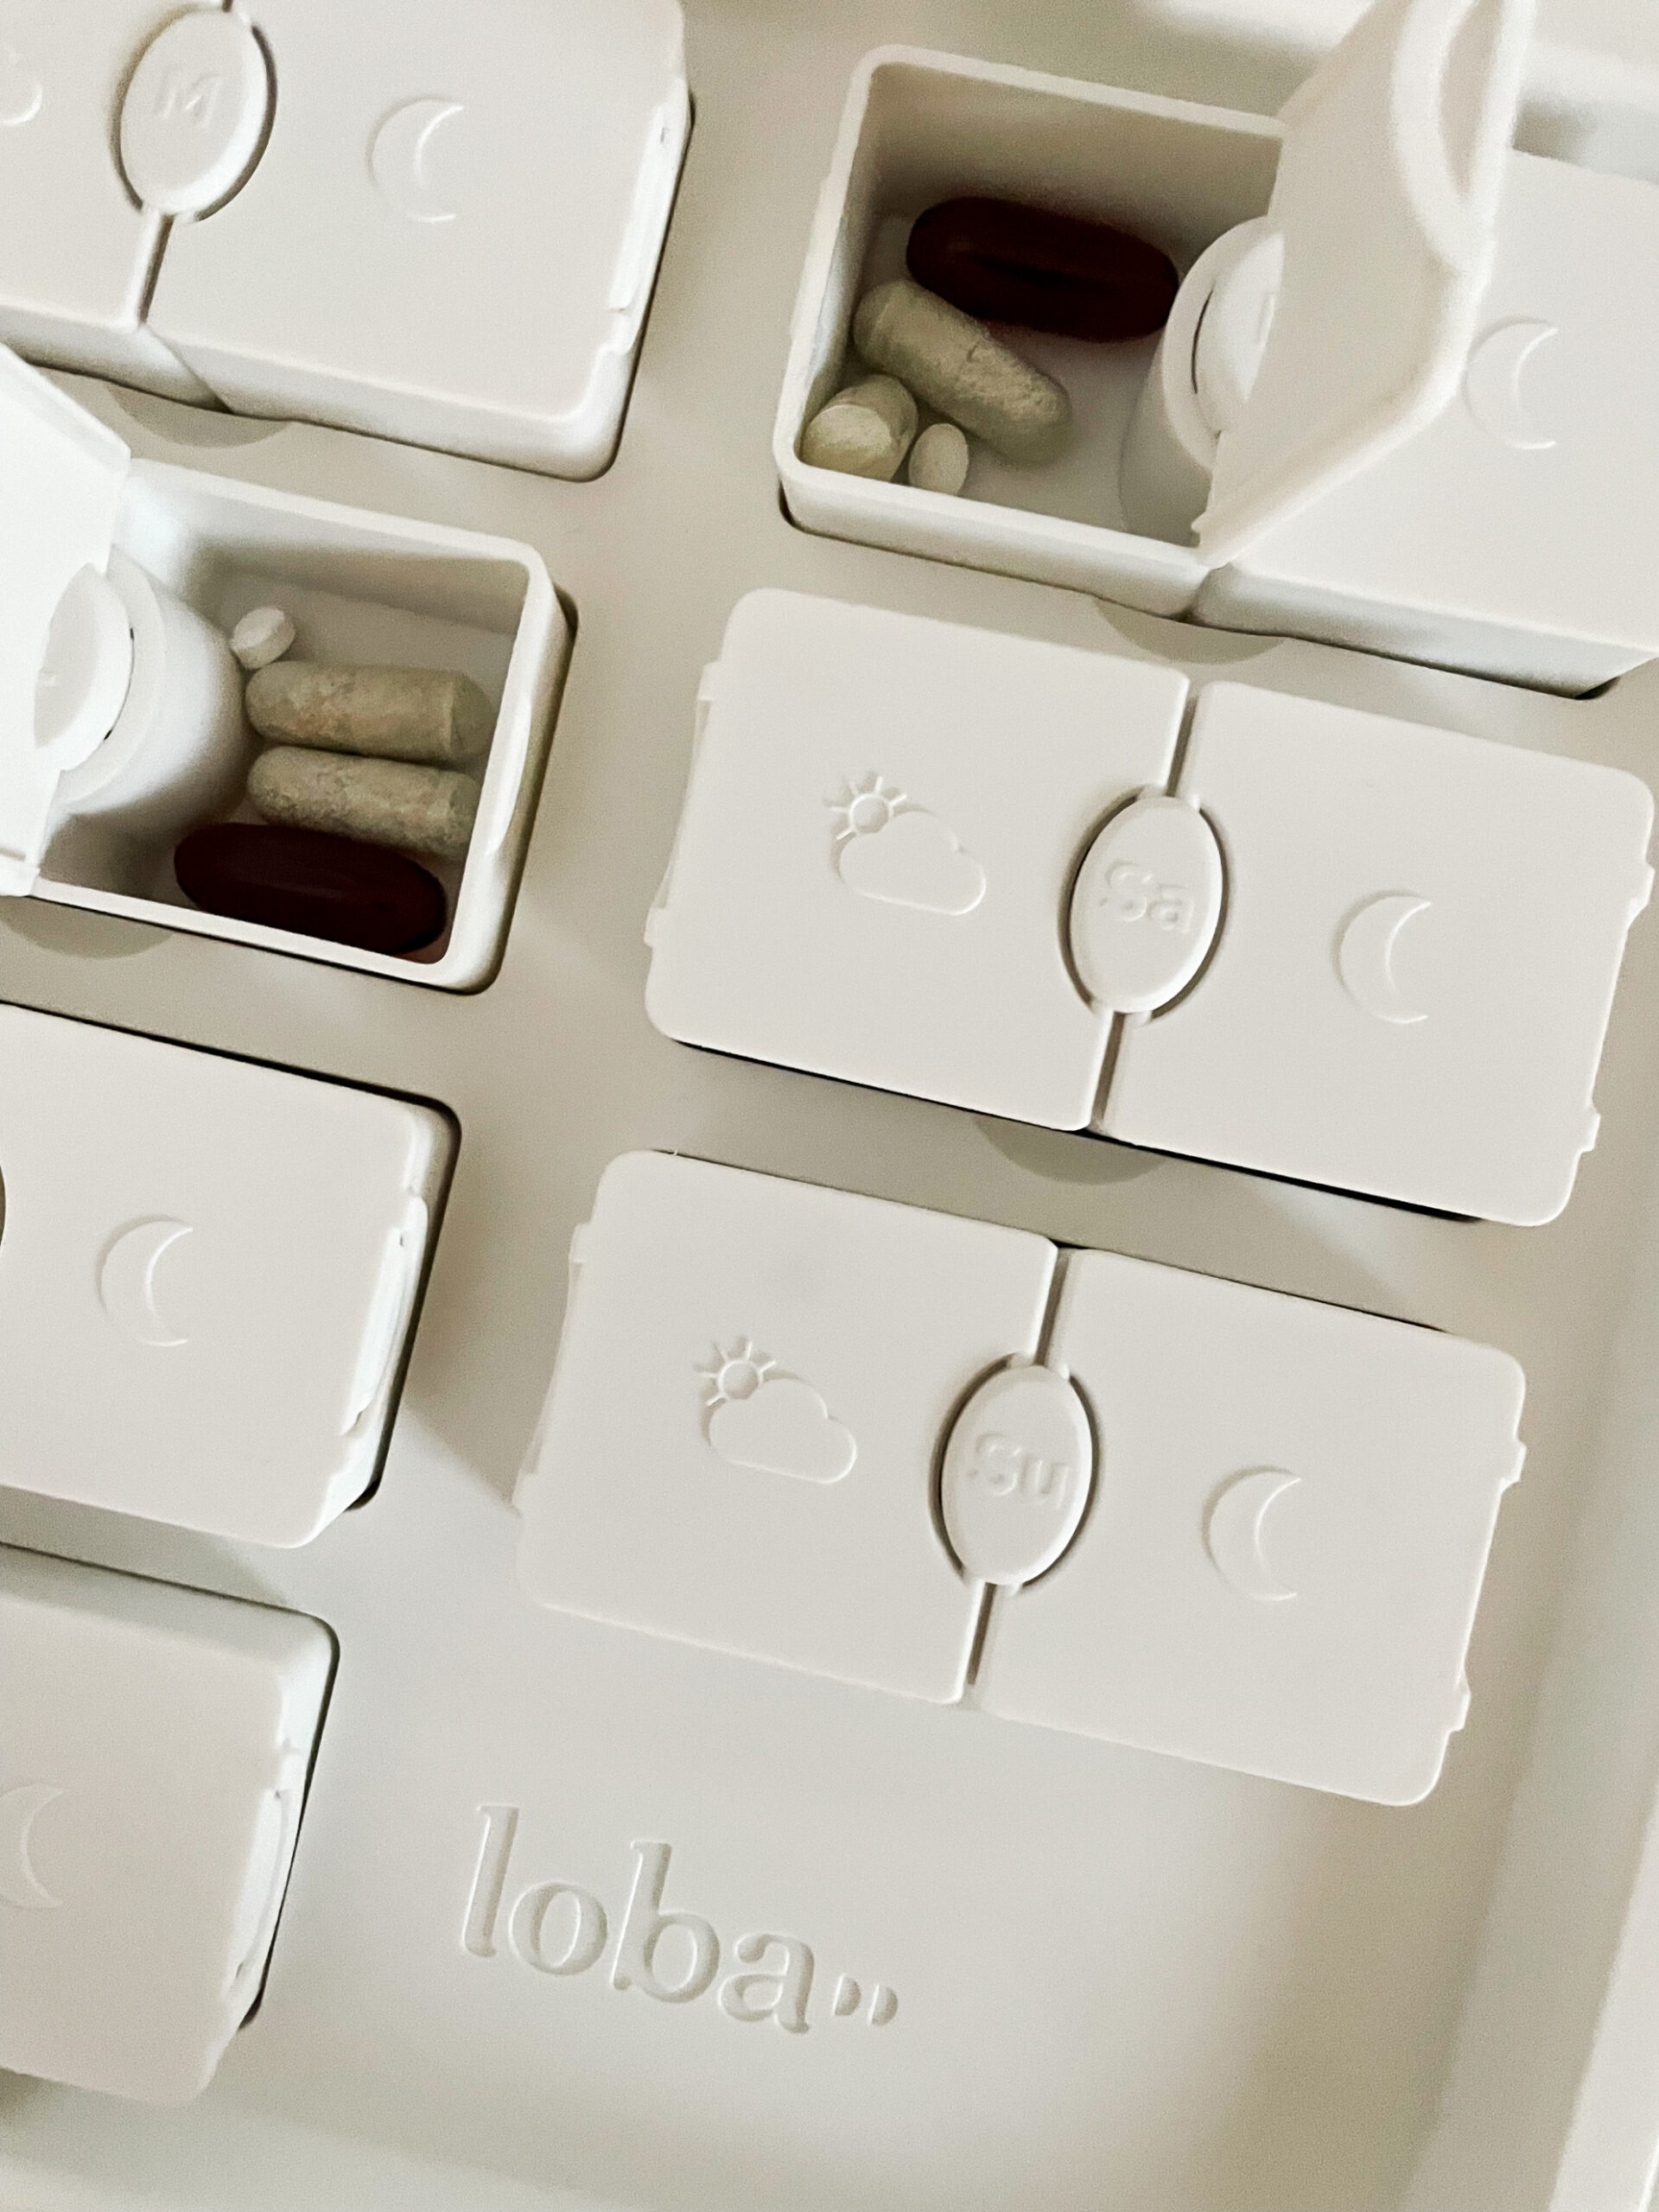 Loba pill organizer on the 2023 holiday gift guide